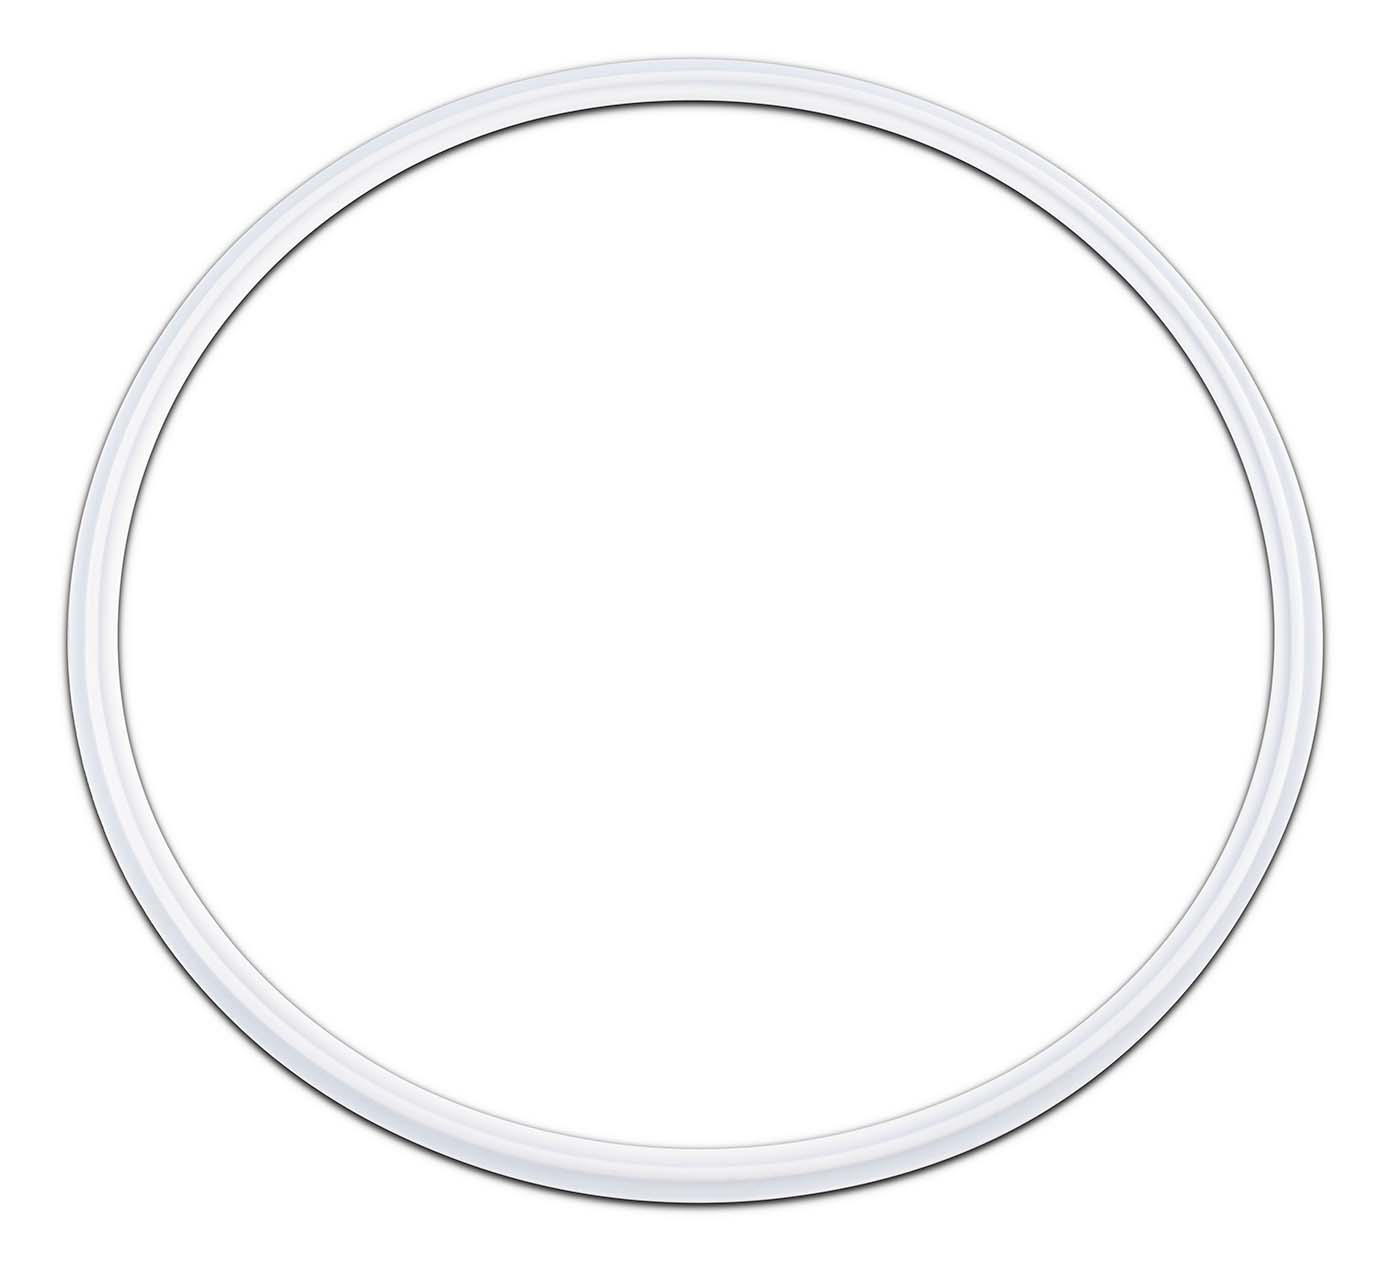 PTFE Envelope Tri-Clamp Gaskets with Viton Filler Shop All Categories BVV 12-inch